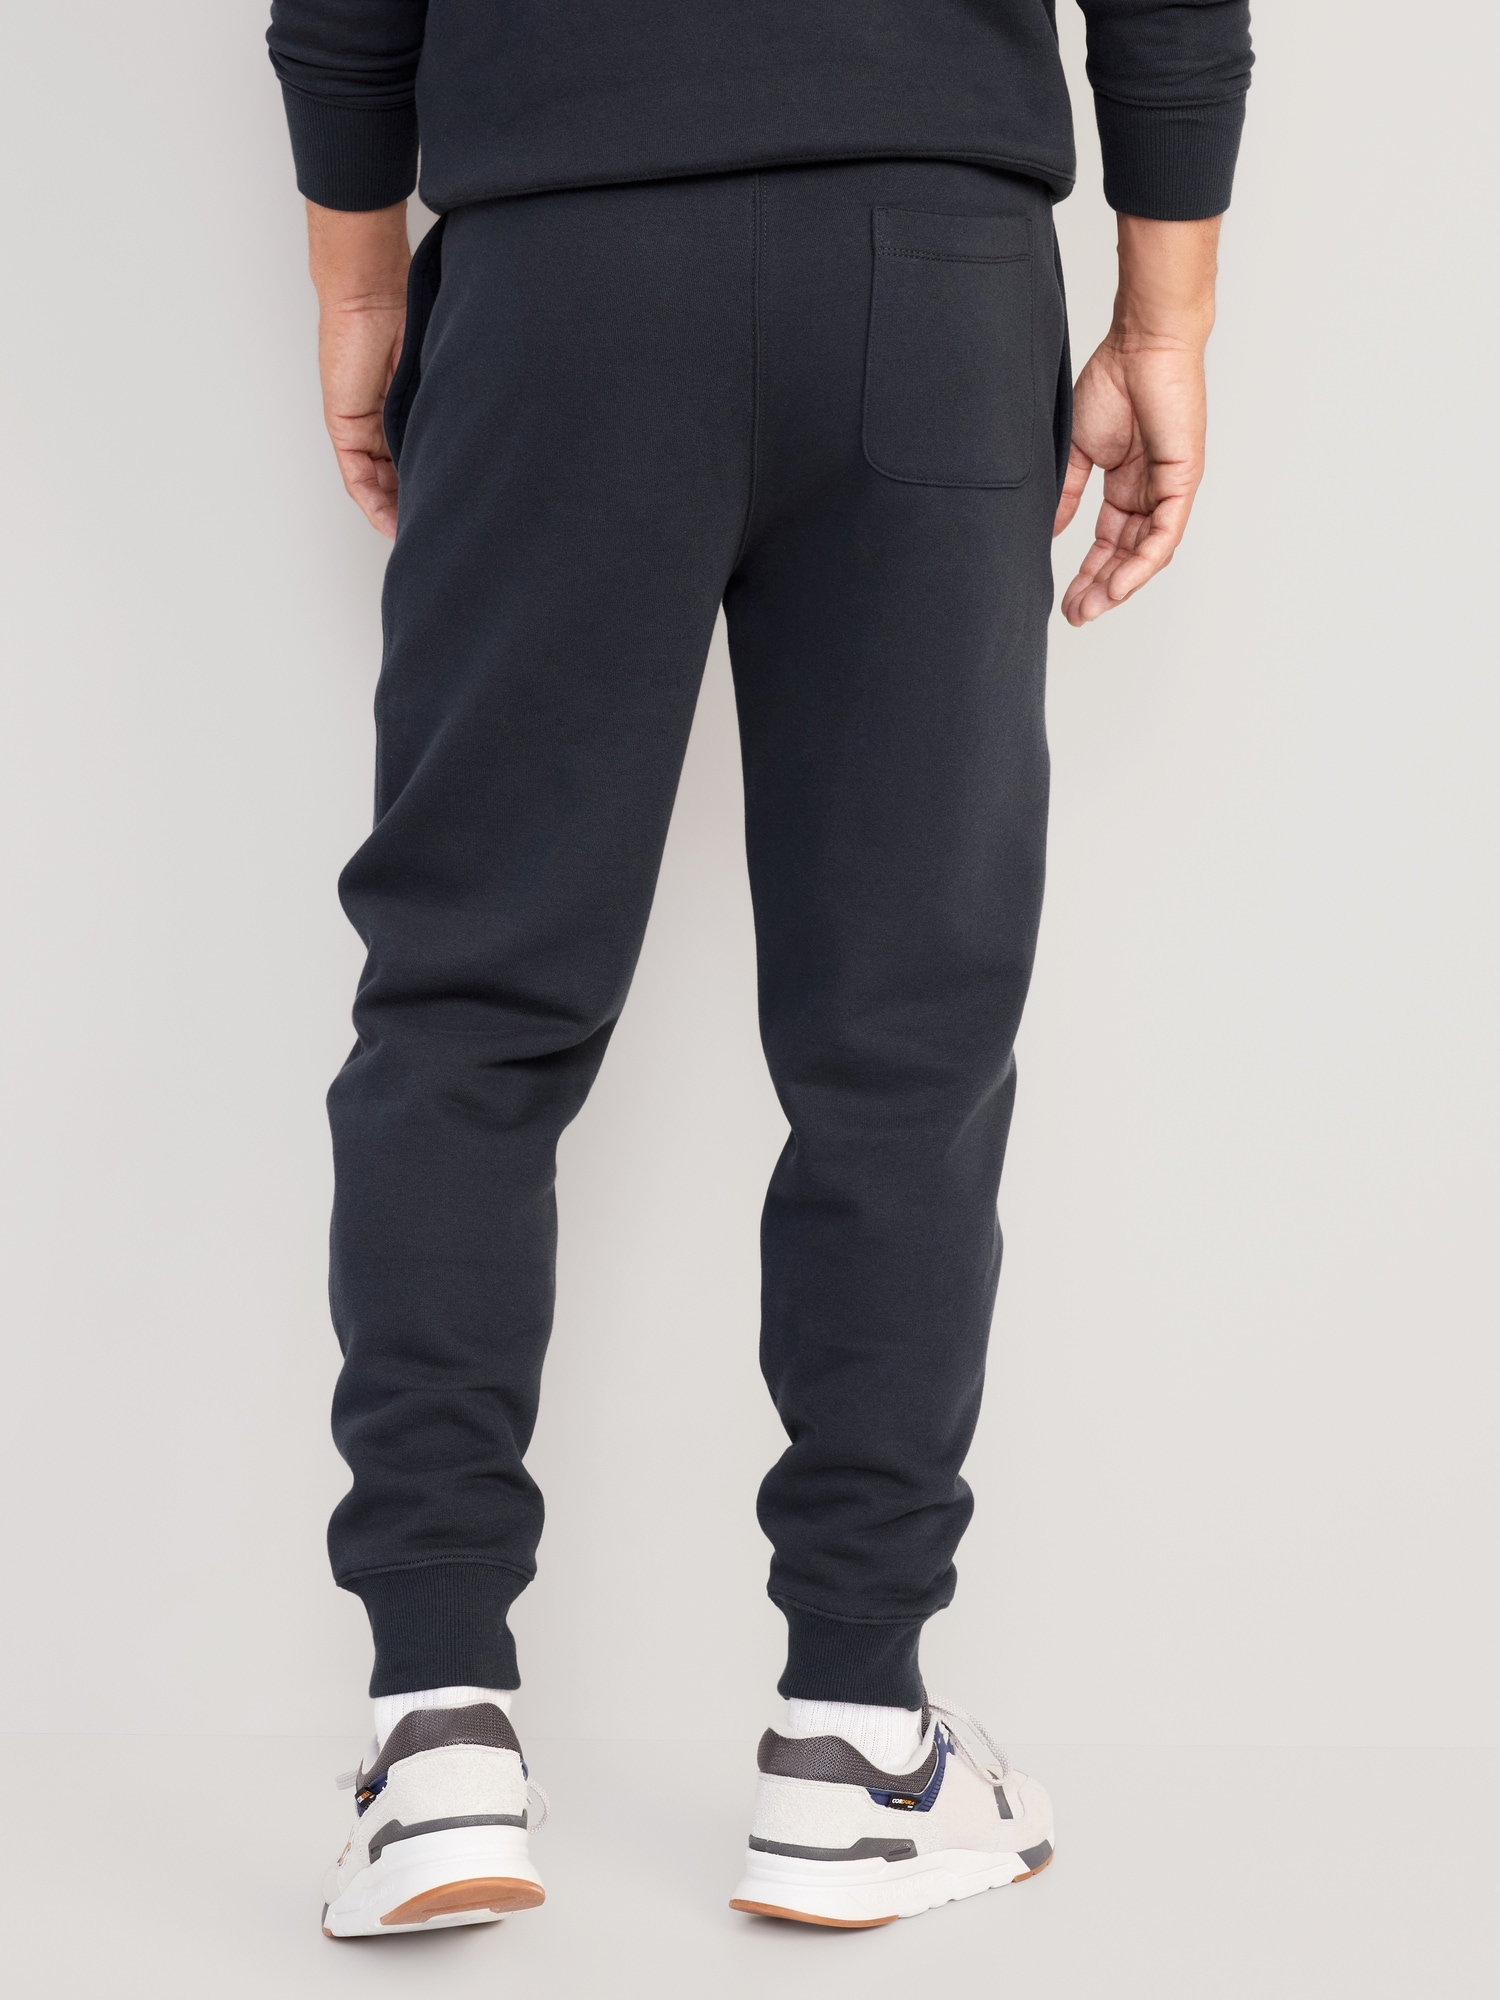 Colleen Lopez Tapered Jogger Pant - 20806410